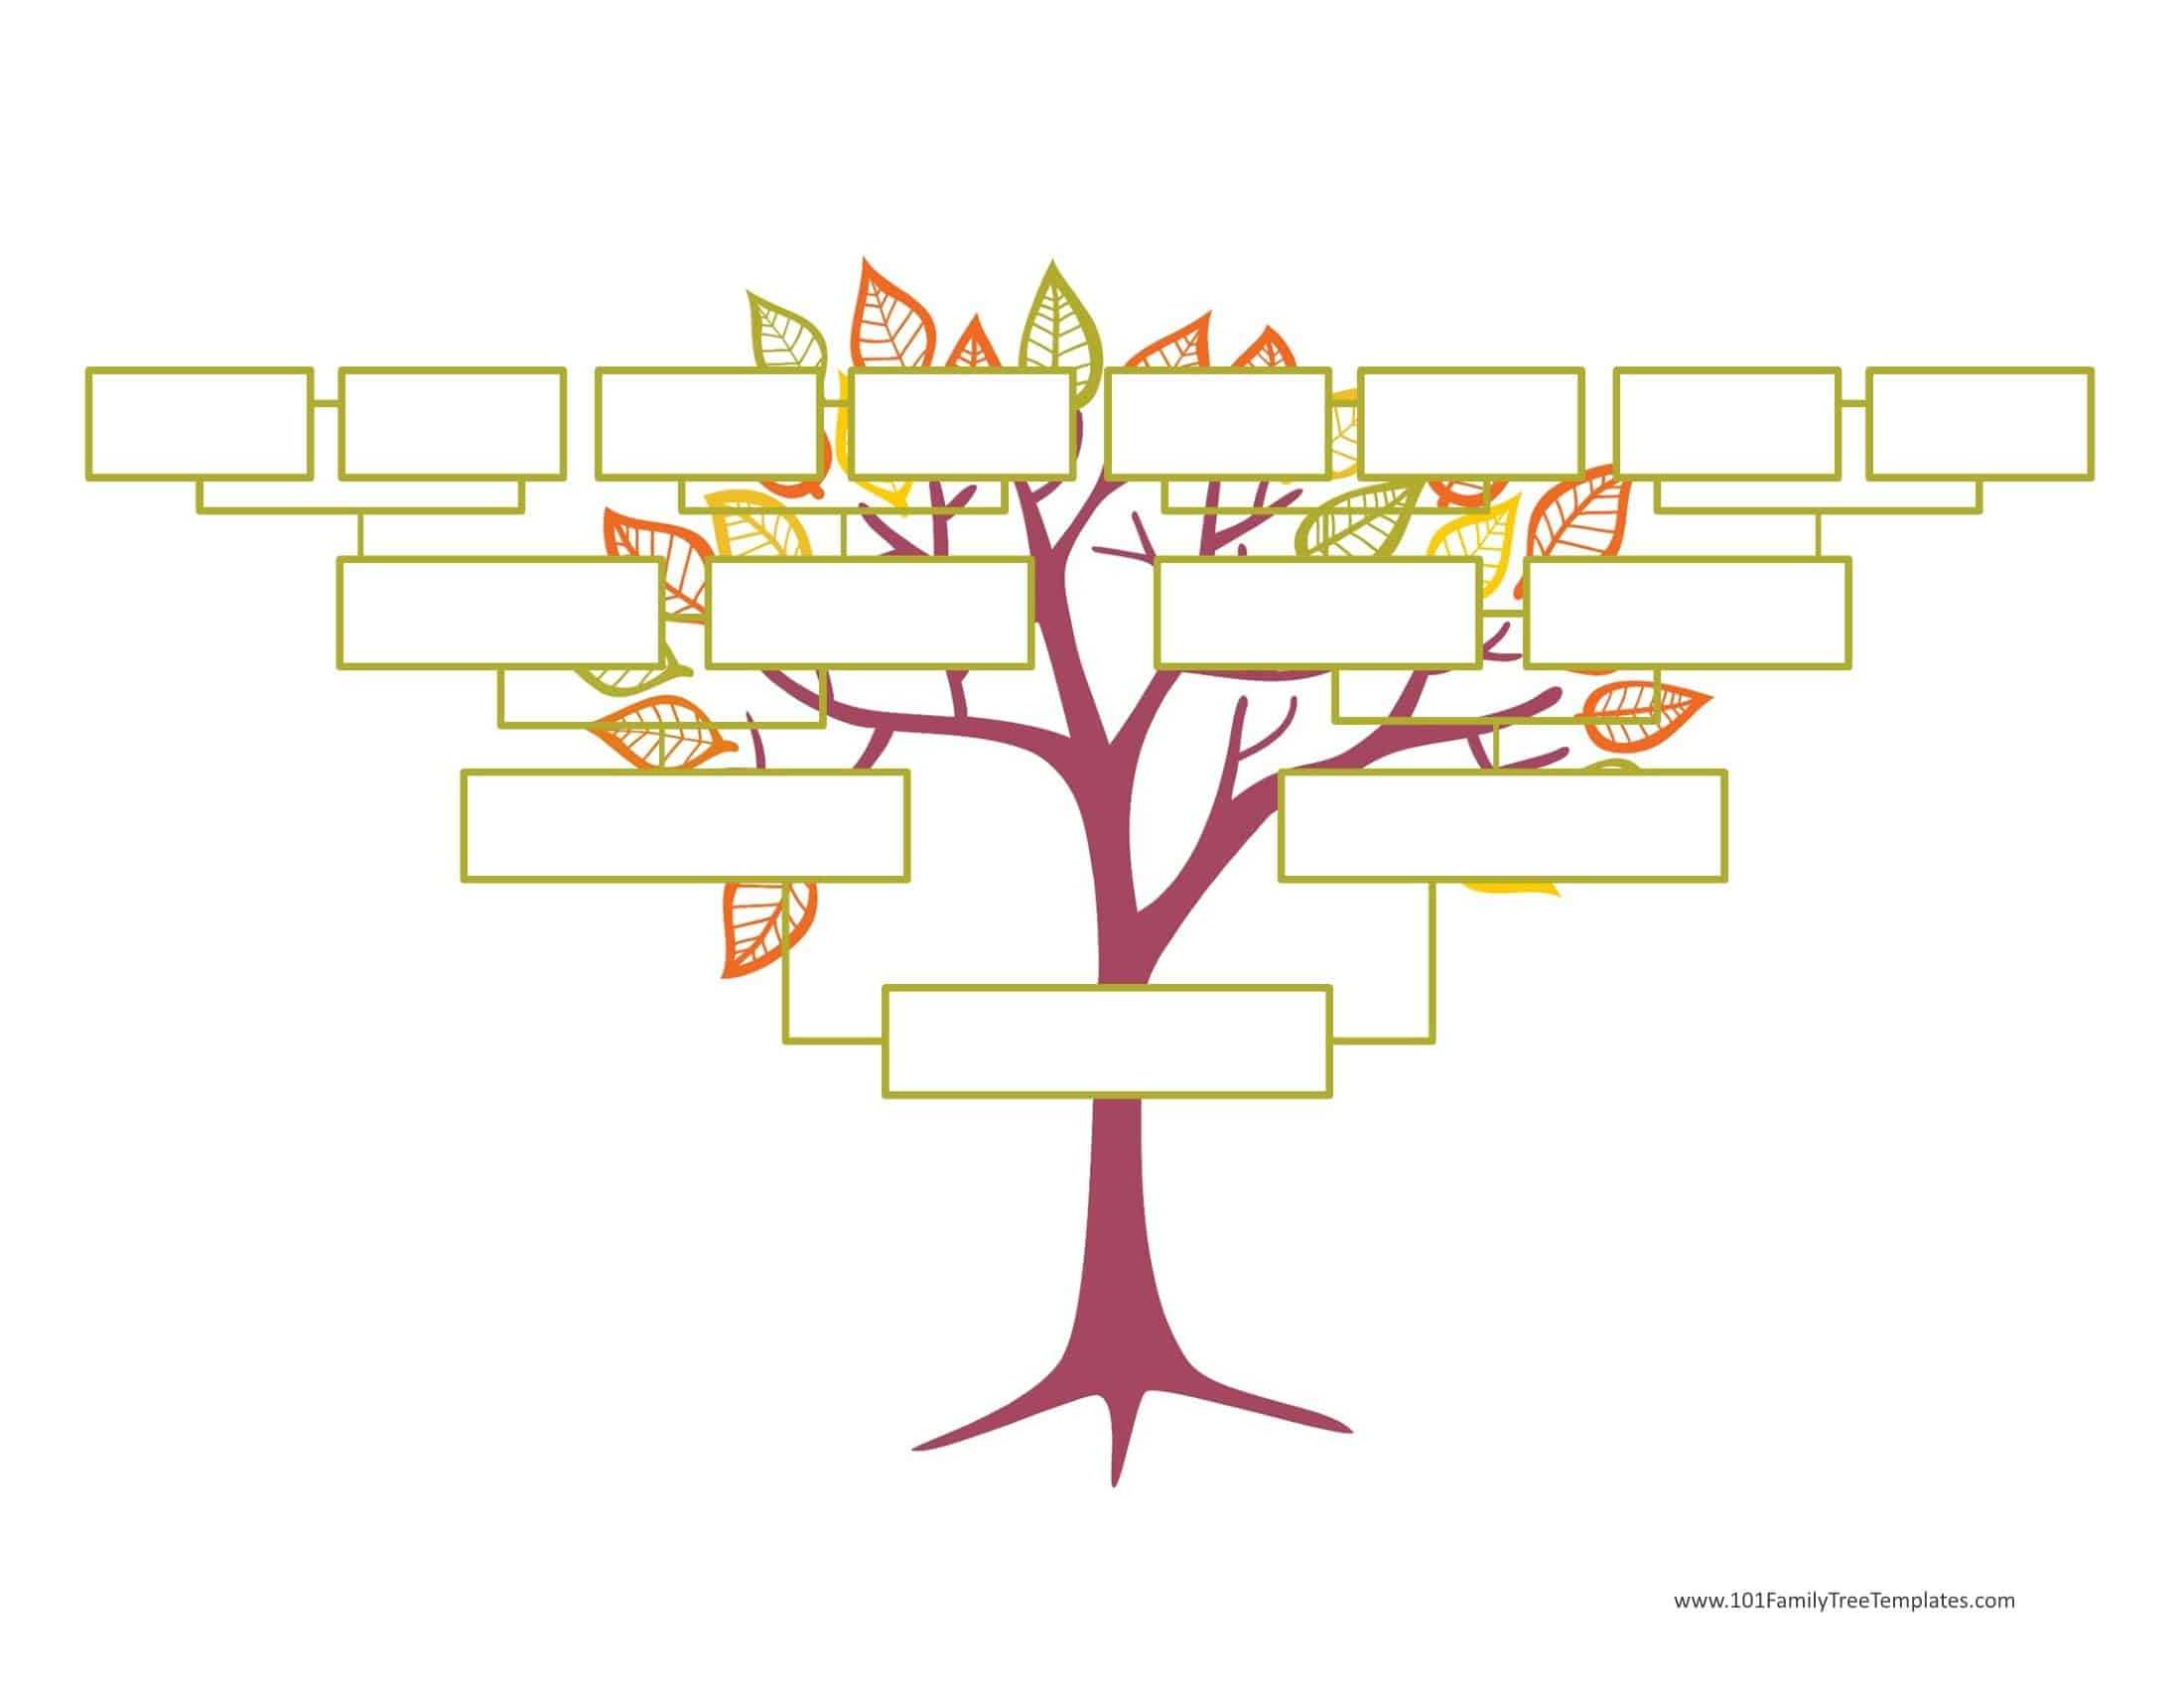 Blank Family Tree Template | Free Instant Download Throughout Fill In The Blank Family Tree Template